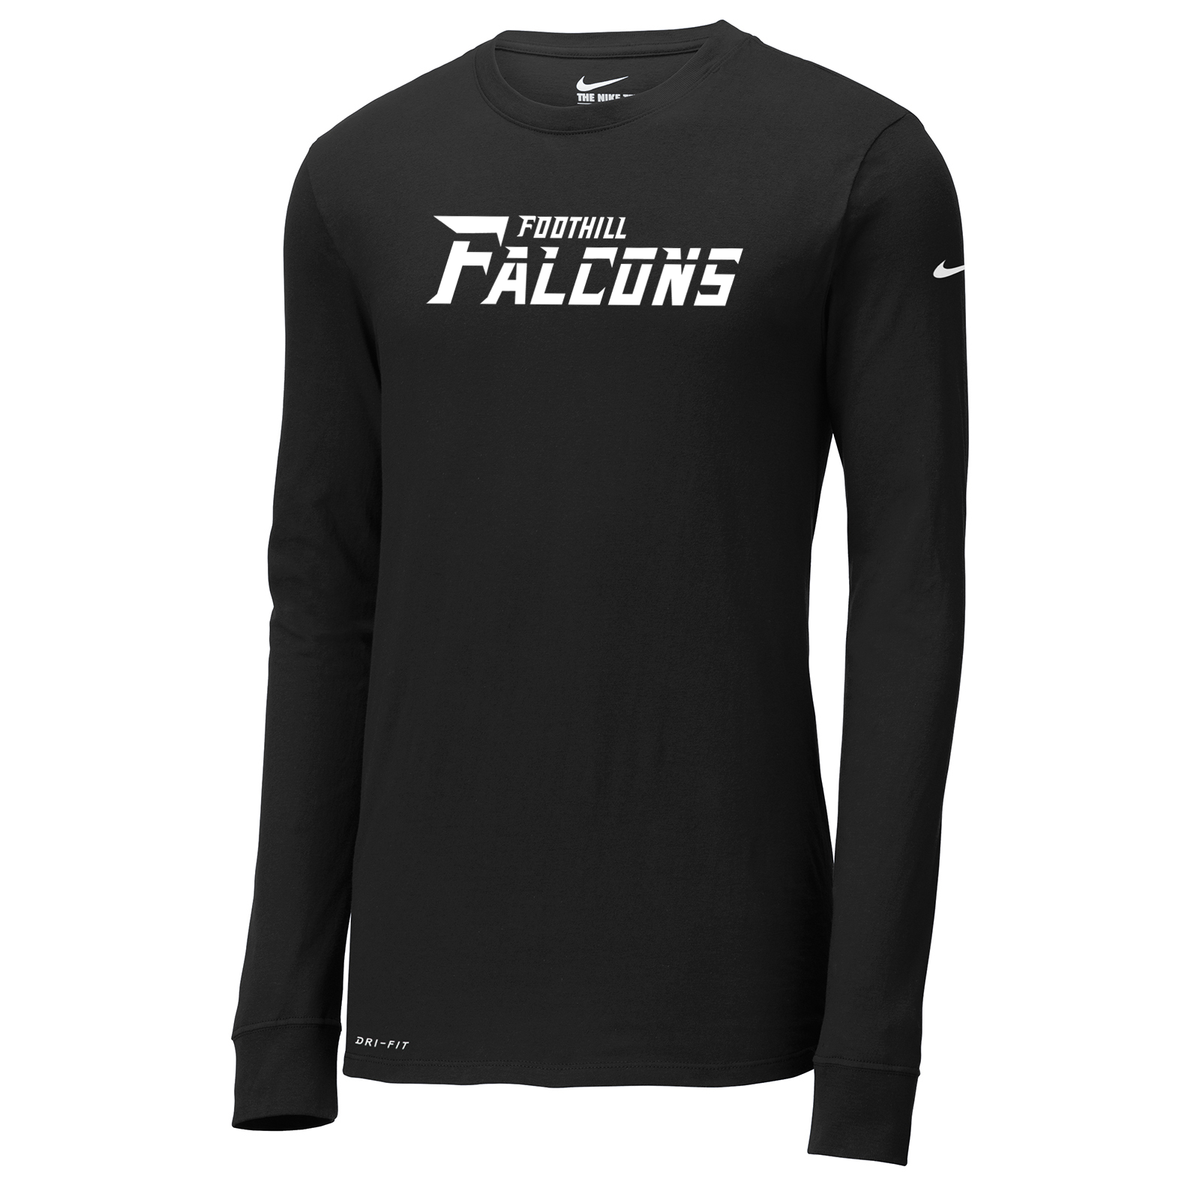 Foothill Falcons Nike Dri-FIT Long Sleeve Tee